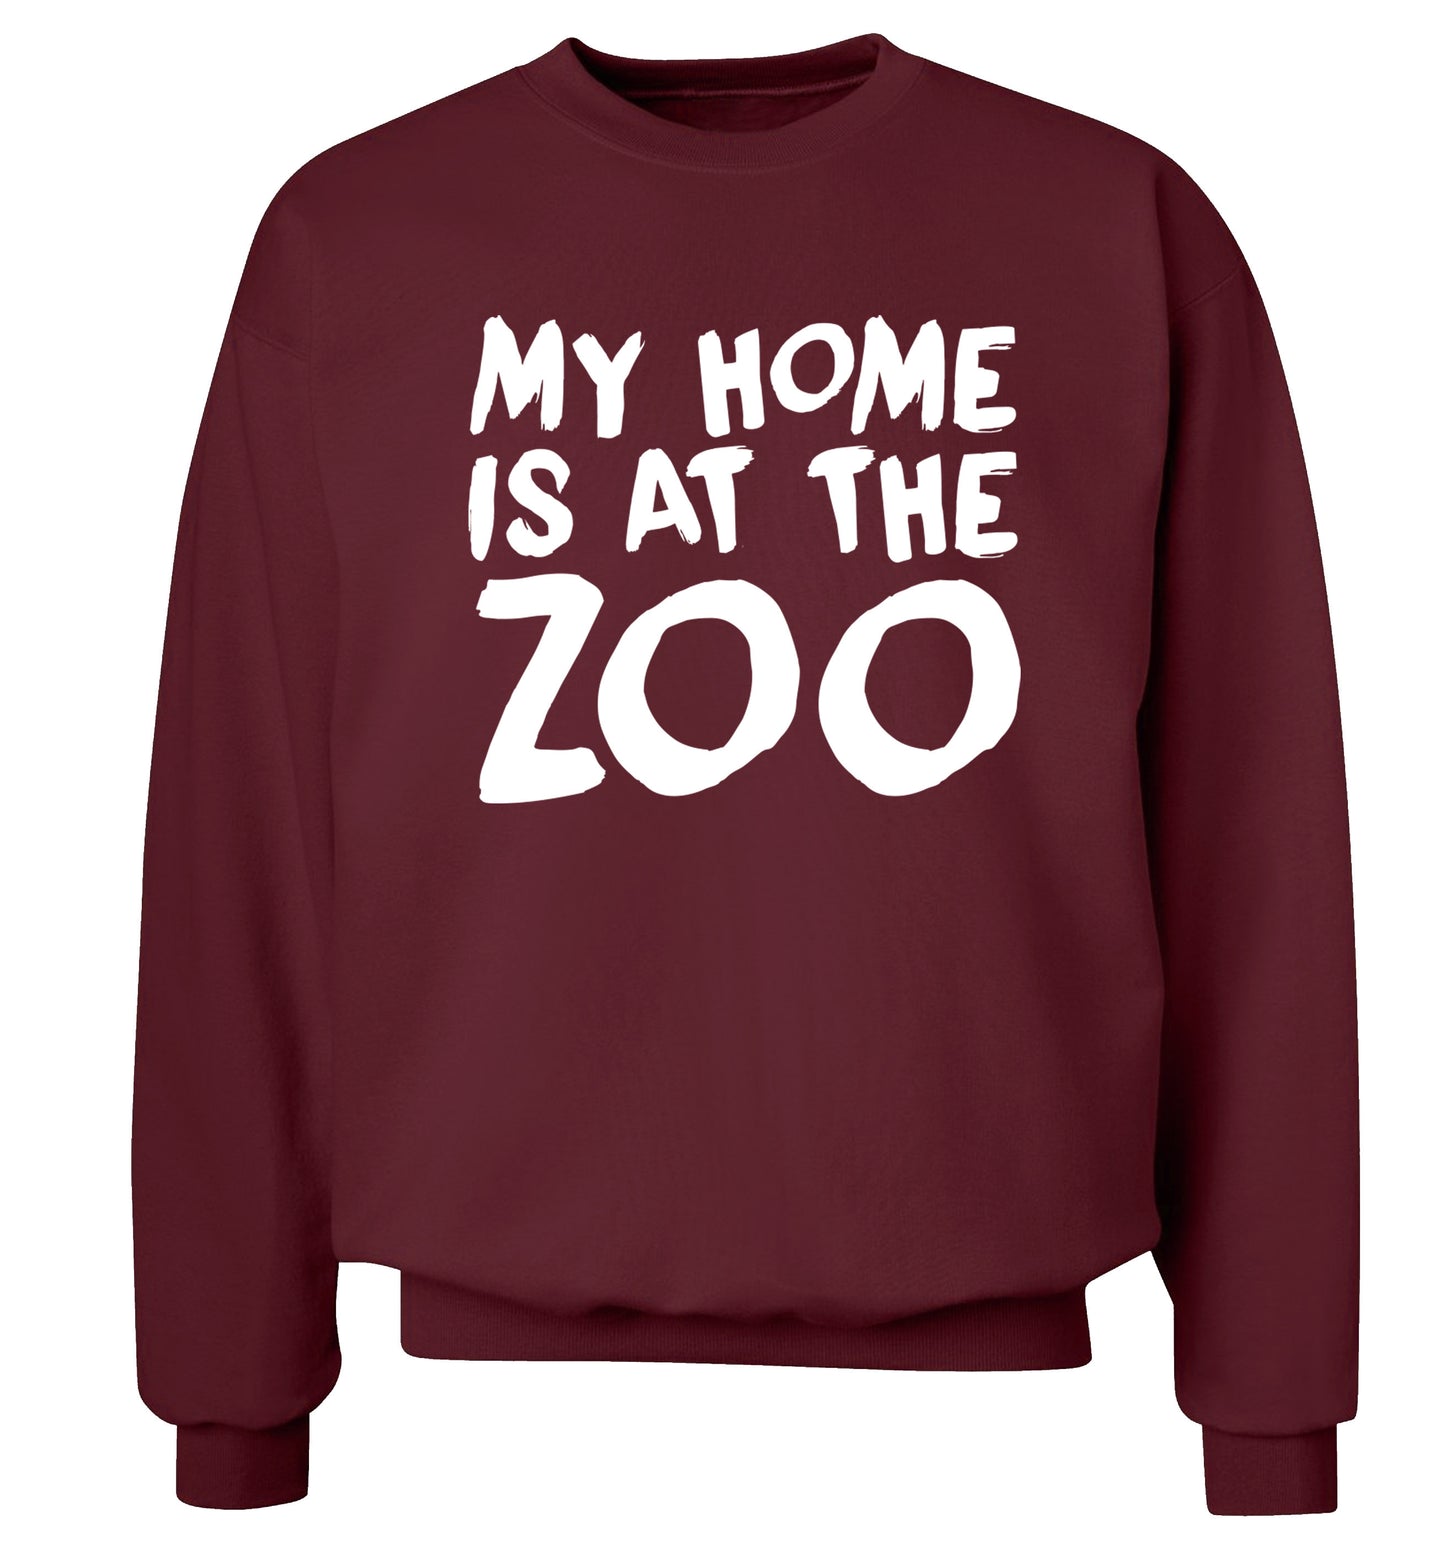 My home is at the zoo Adult's unisex maroon Sweater 2XL